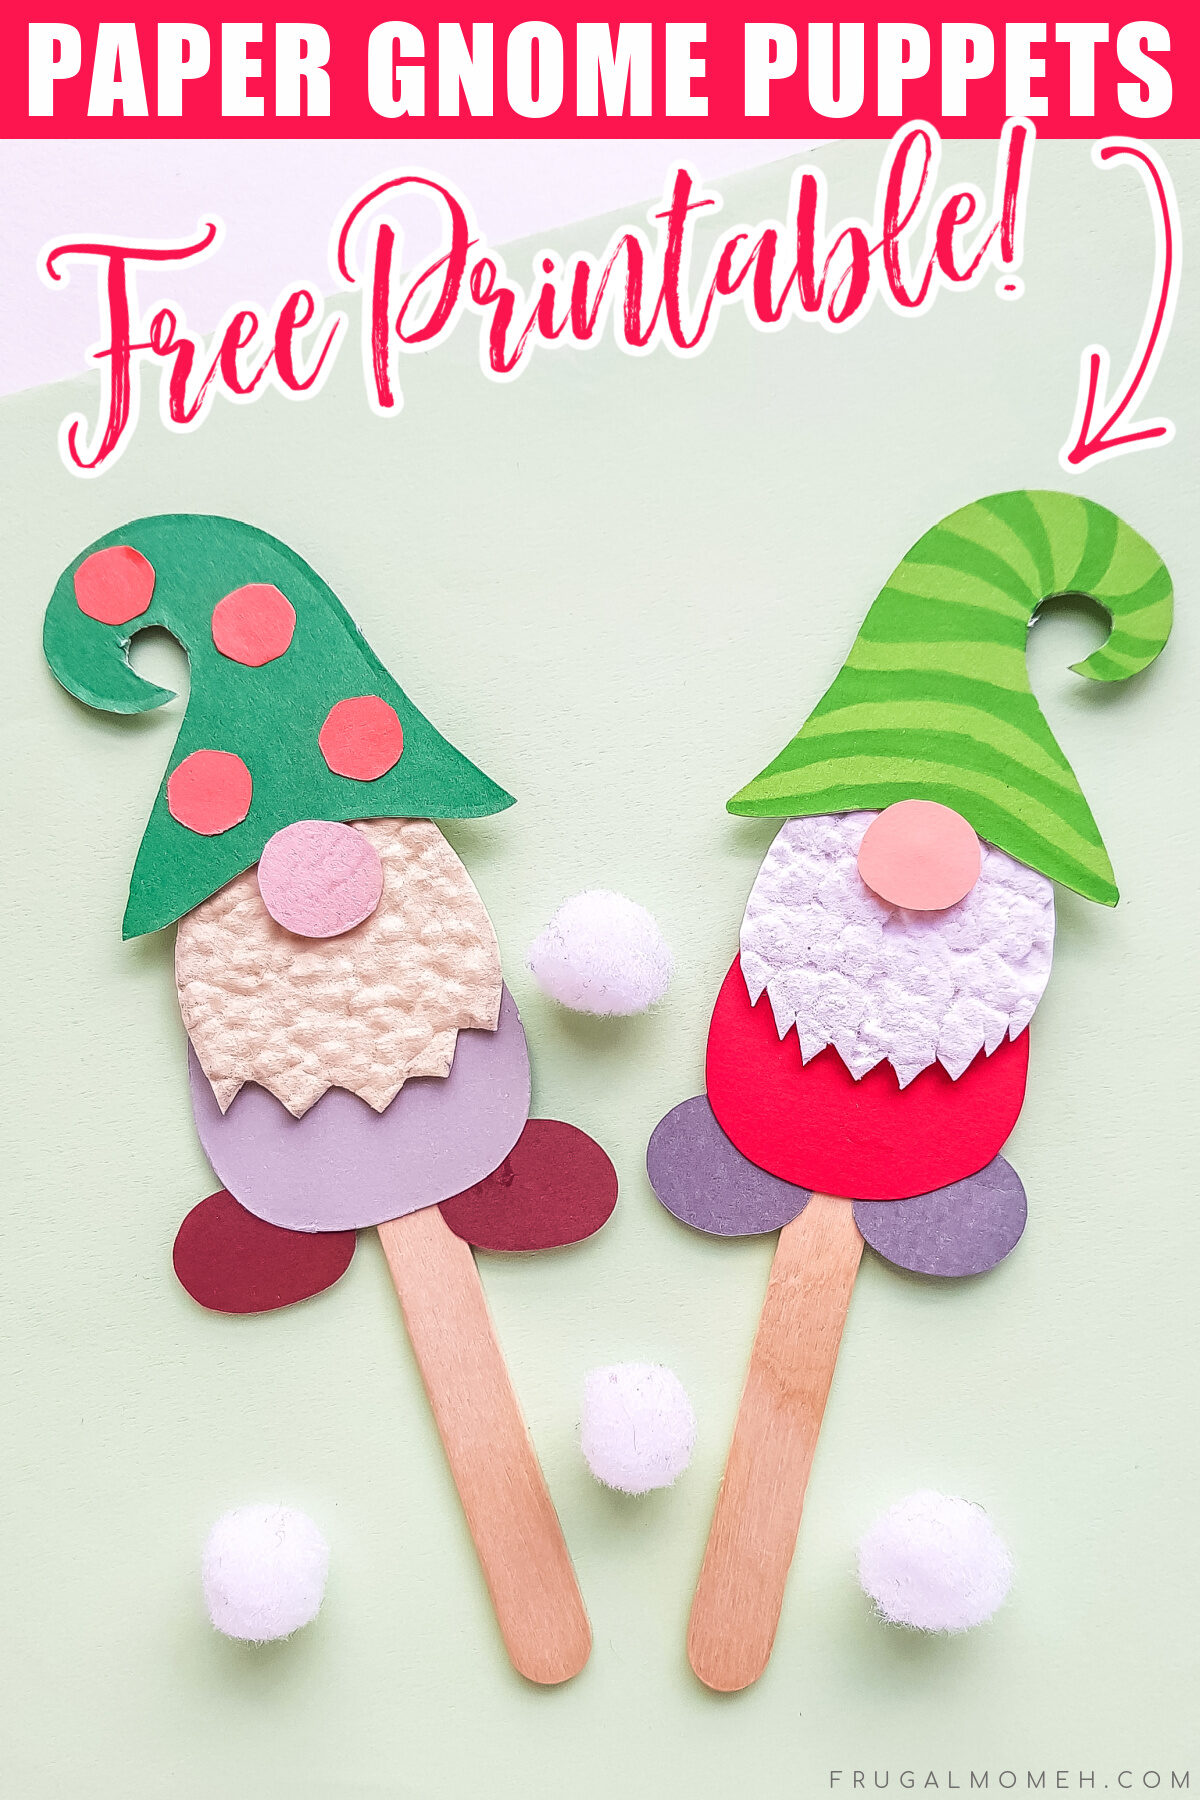 These cute little paper gnome puppets are very easy to make and a fun Christmas craft for kids. Free printable template included!